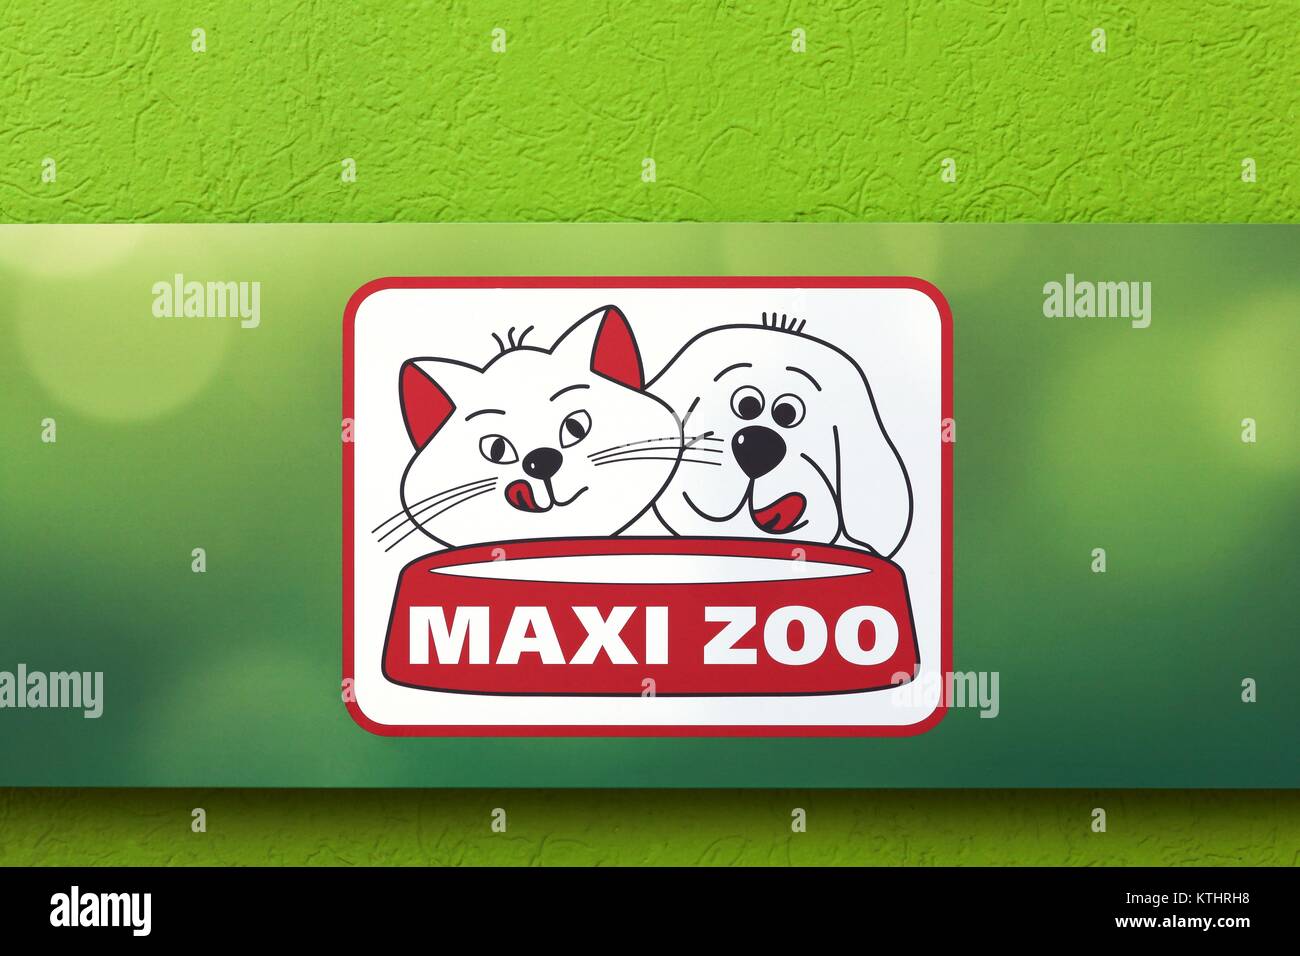 Grenoble, France - June 25, 2017: Maxi Zoo is a German franchise company for pet food Stock Photo